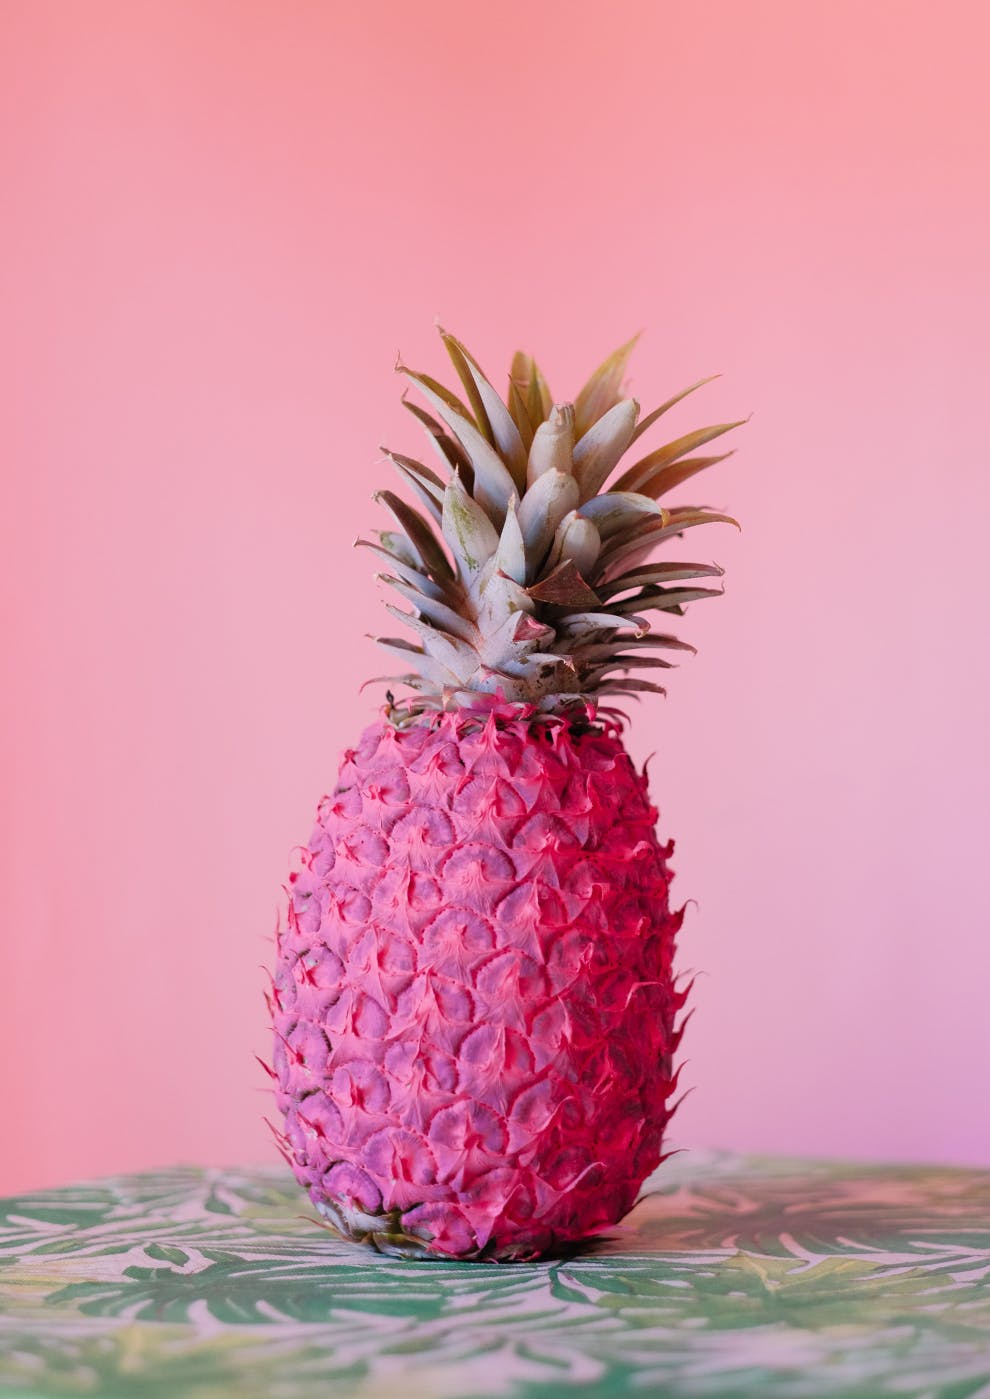 A pink pineapple